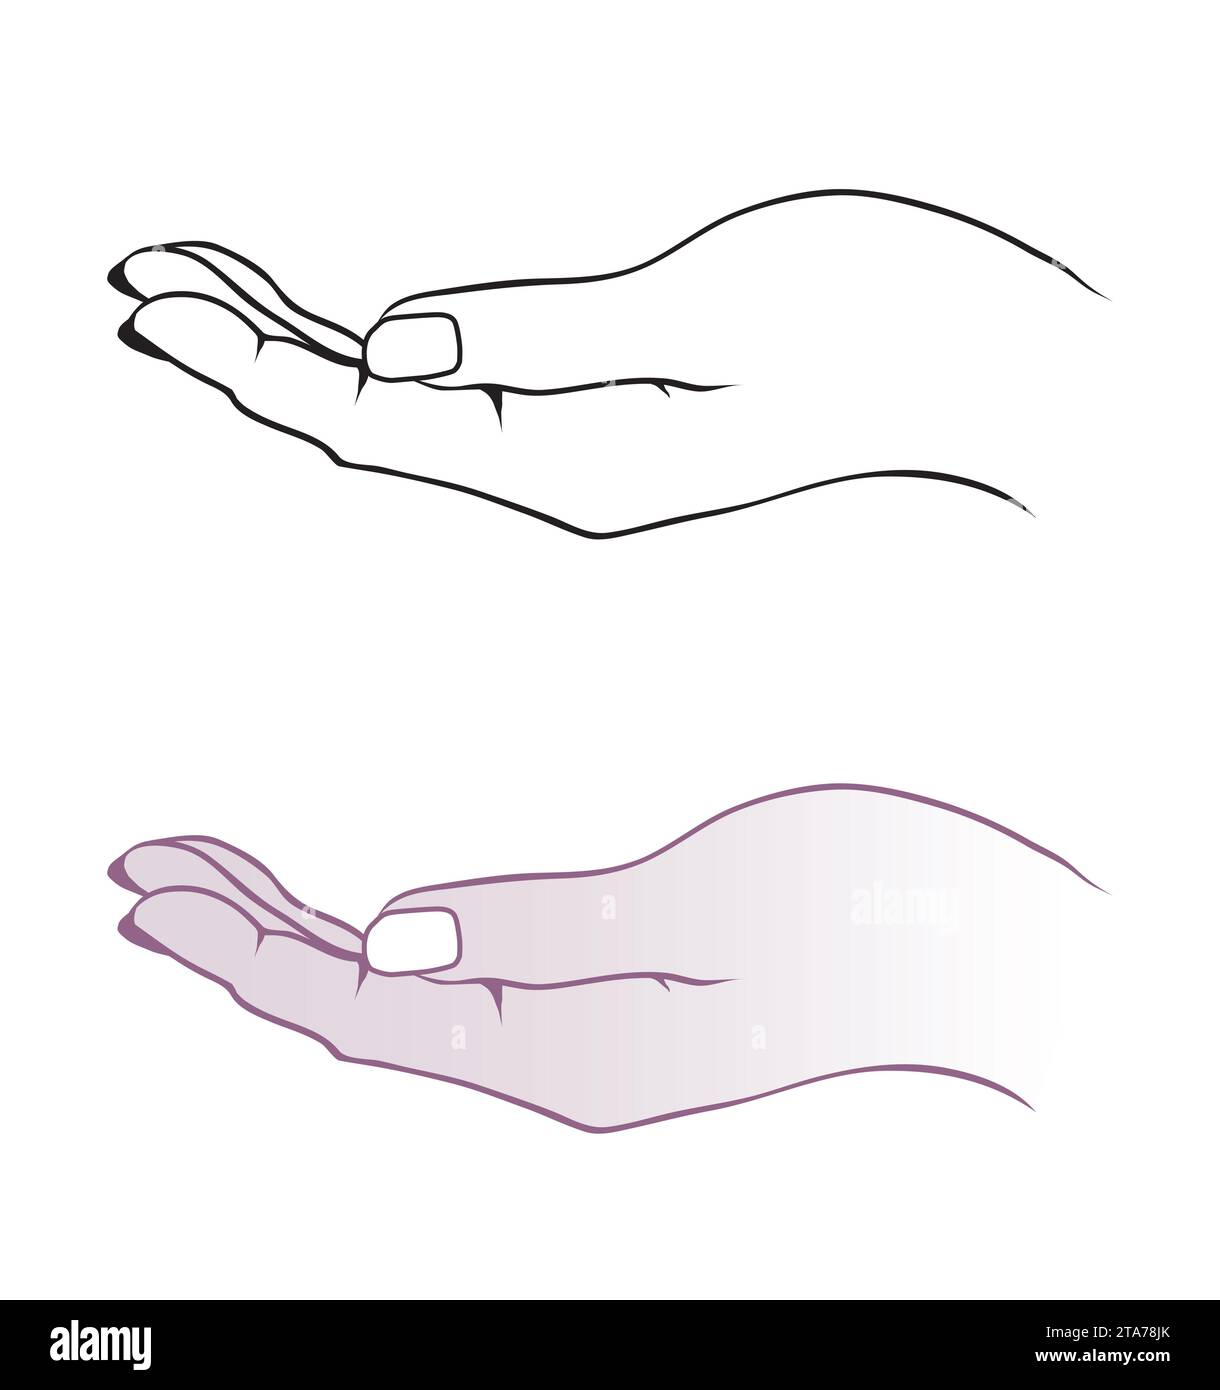 Template of  two drawn hand that could hold something Stock Vector